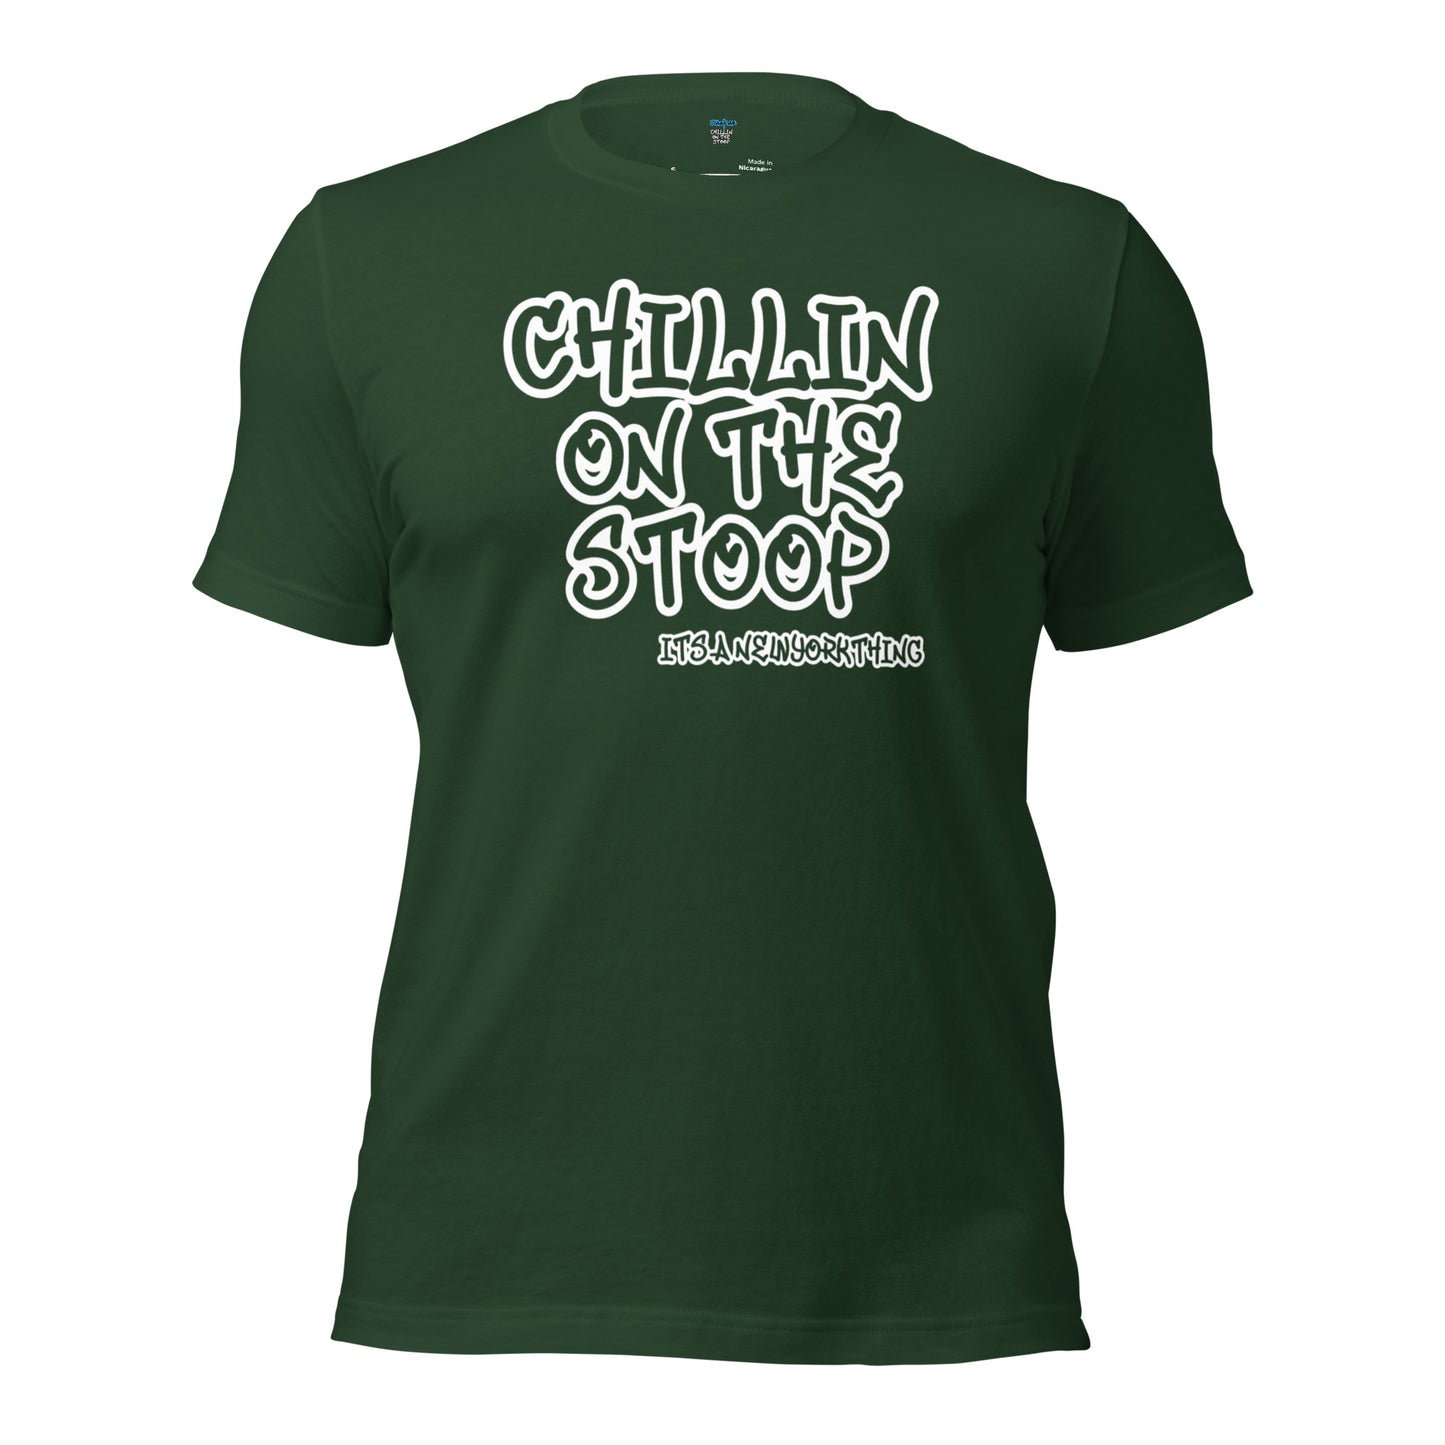 #1 CHILLIN ON THE STOOP Unisex t-shirt in different colors